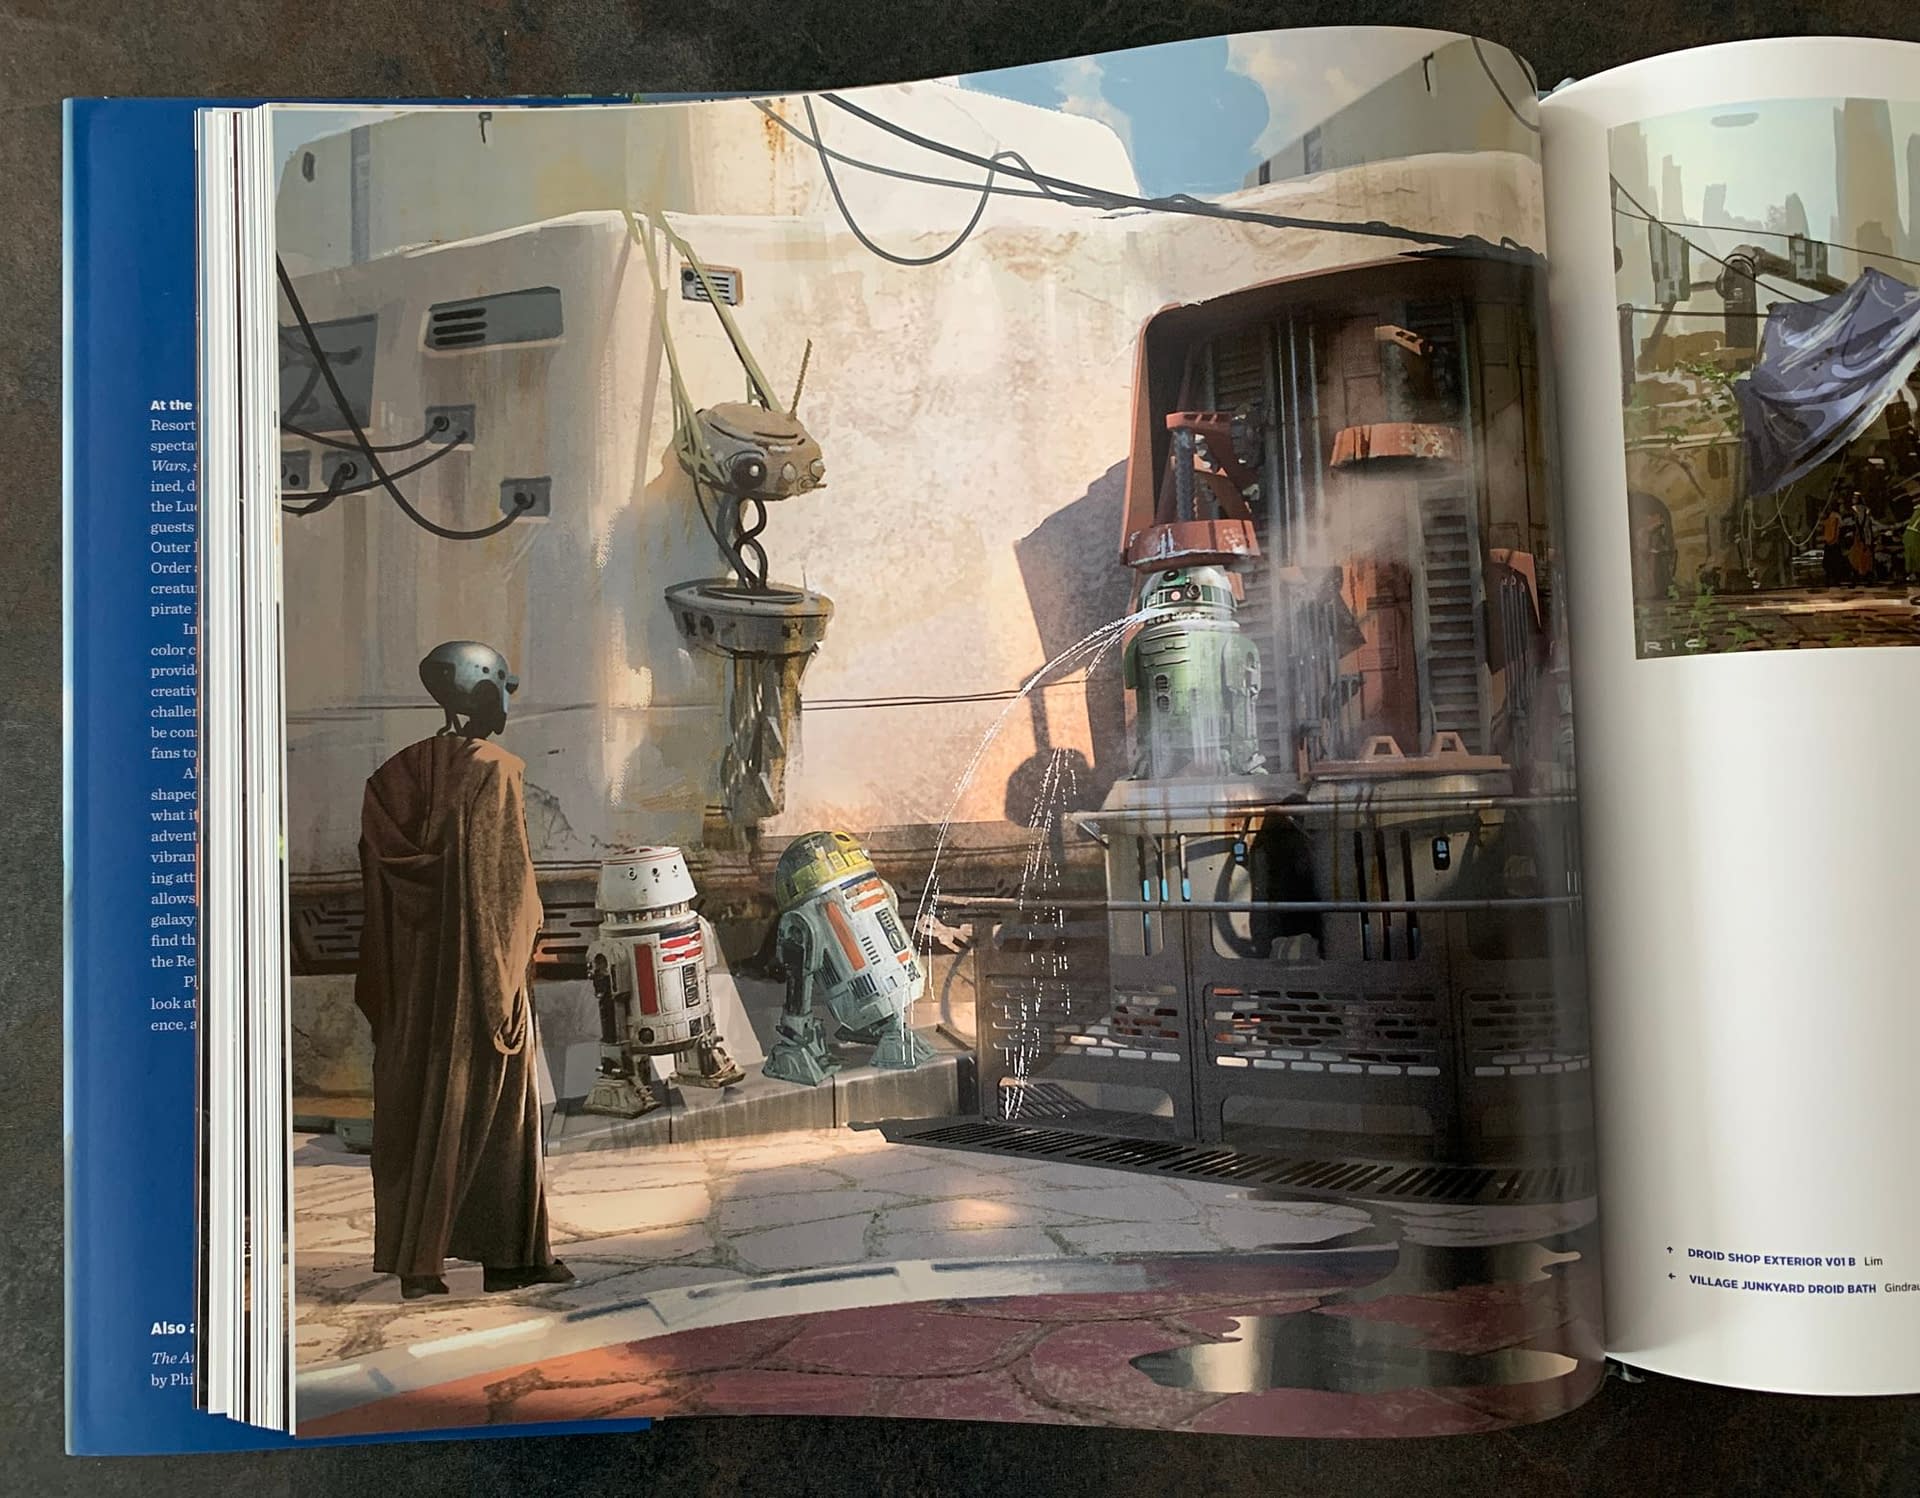 Star Wars The Art Of Galaxy's Edge Transports You To Another World